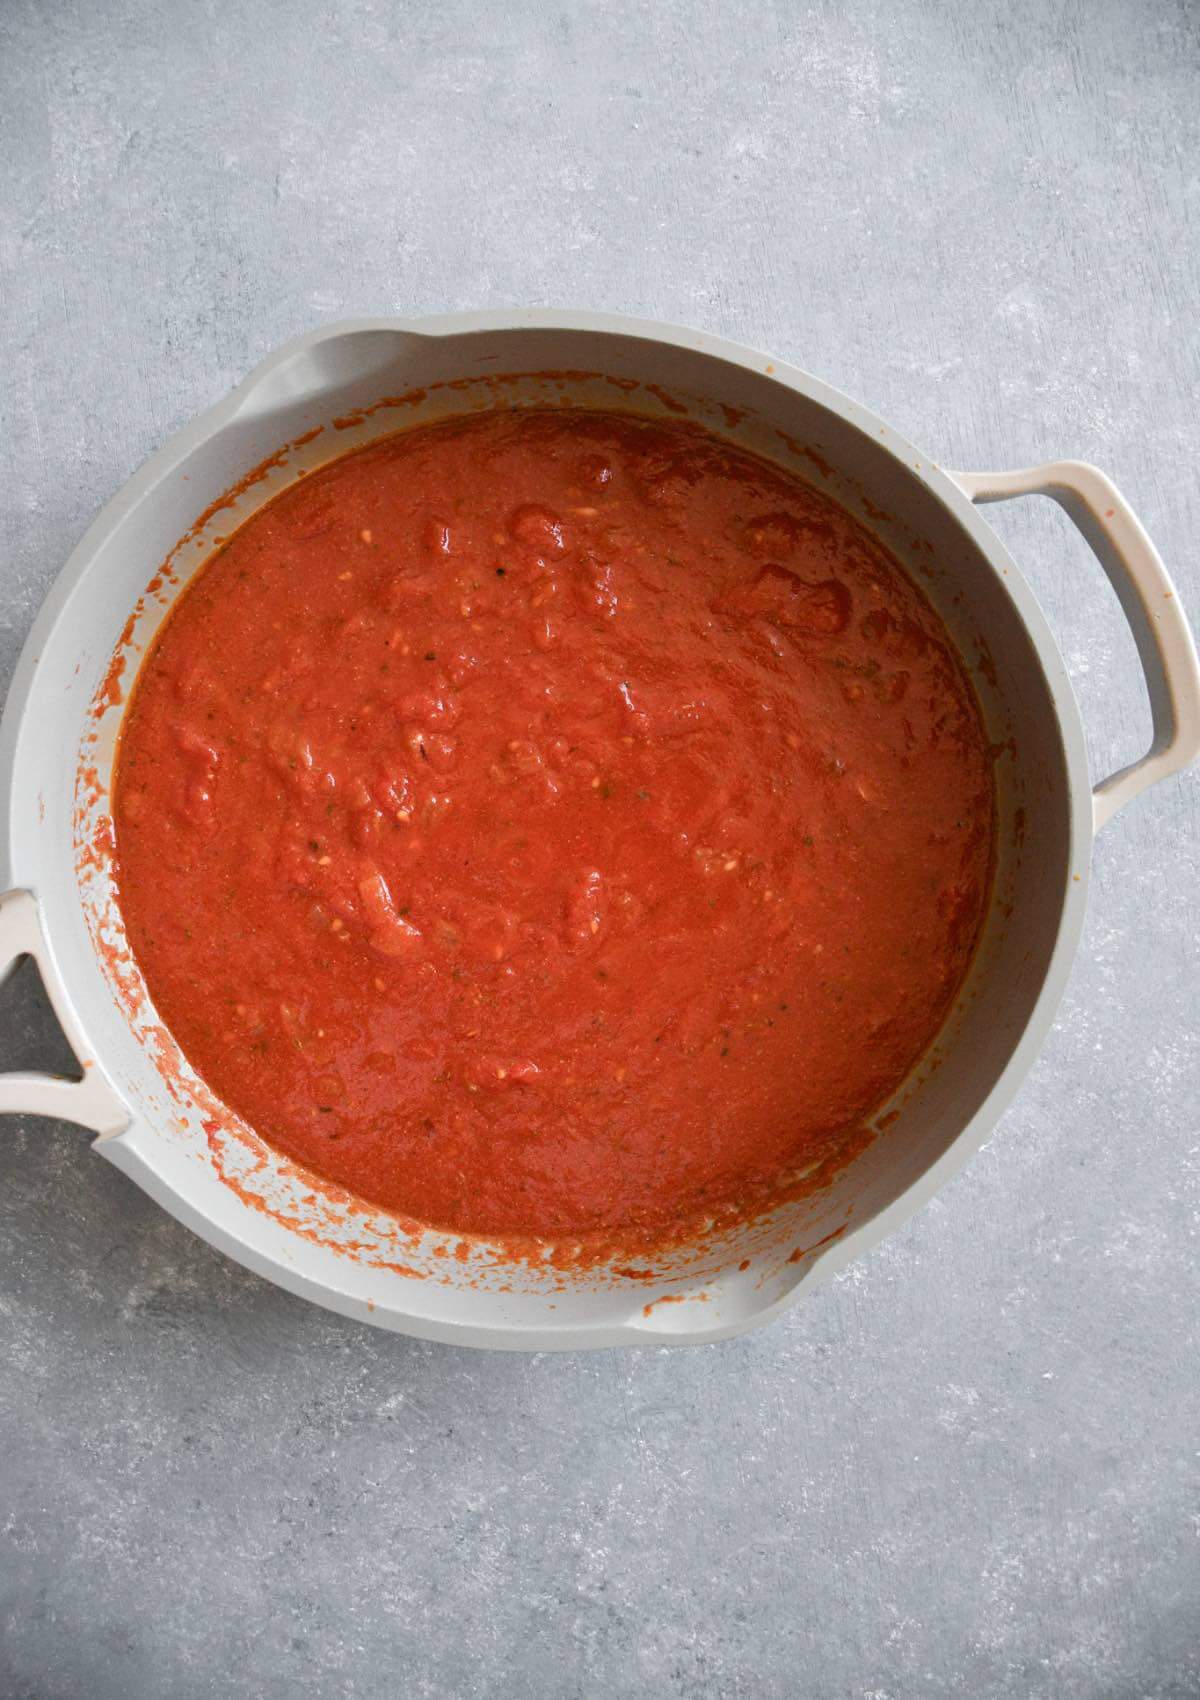 tomato sauce cooking in a frying pan.